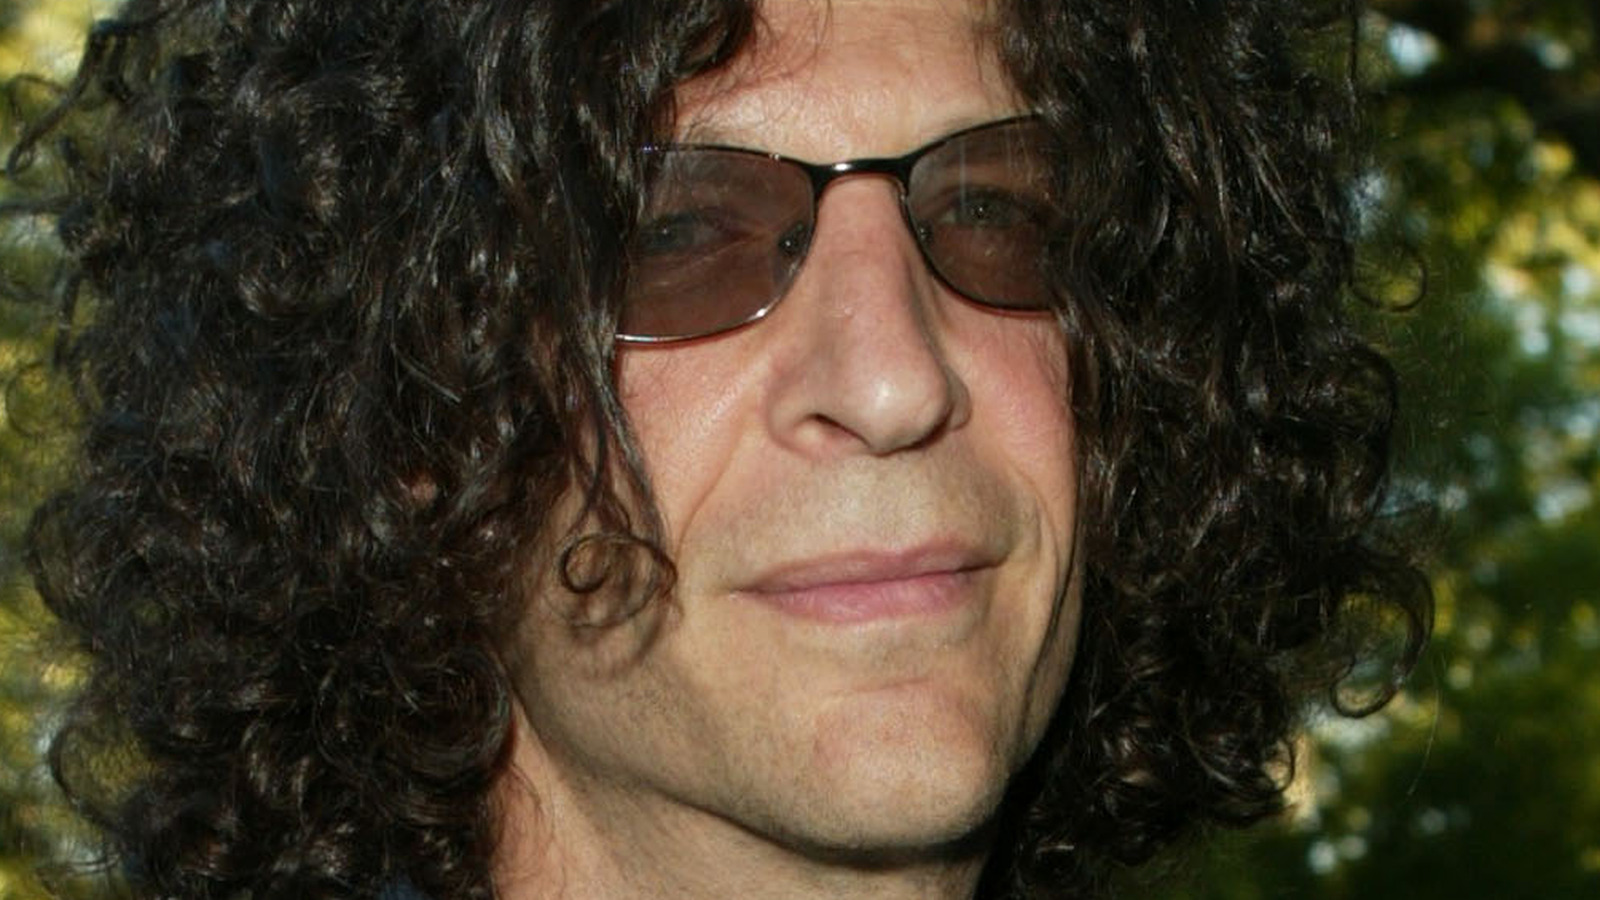 howard stern without glasses